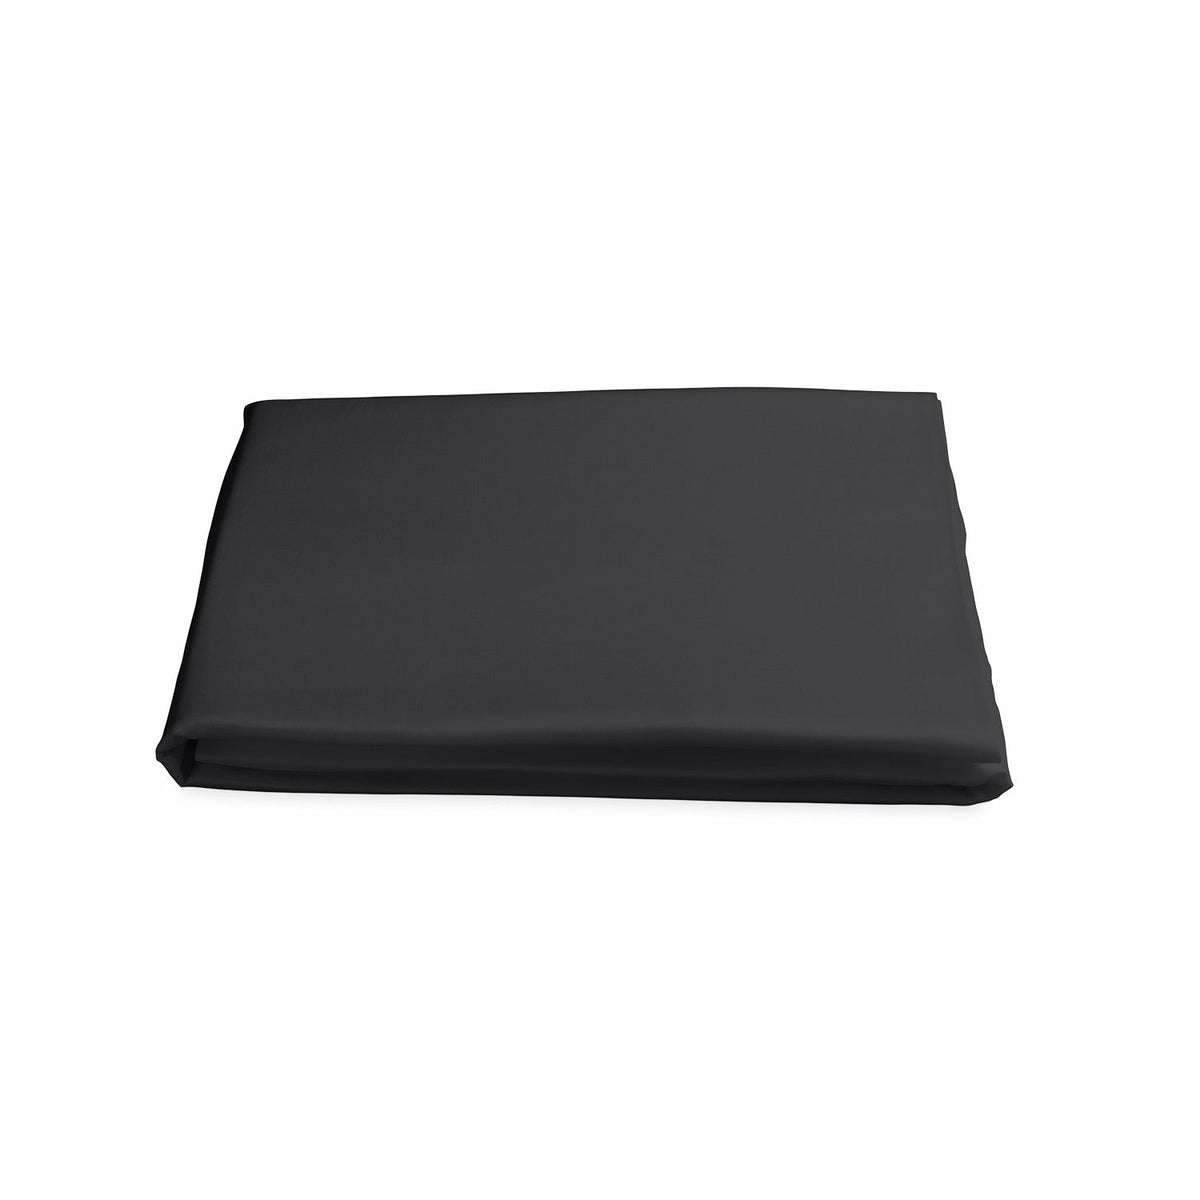 Matouk Nocturne Bedding Collection Fitted Sheet Black Fine Linens